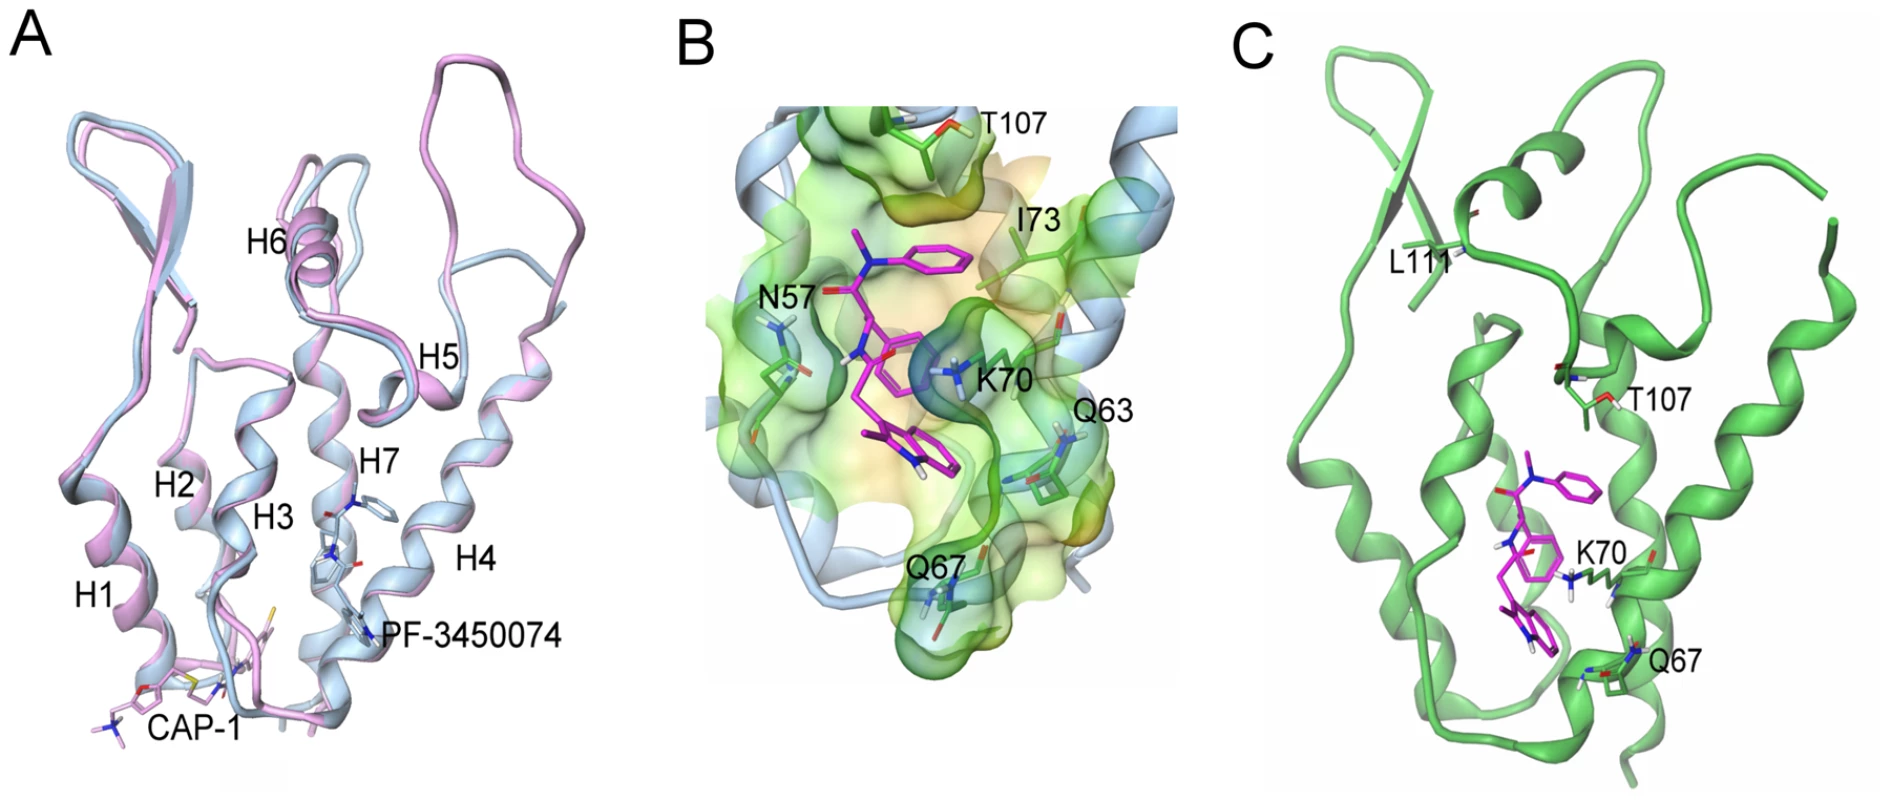 Structure of the novel inhibitor binding site and context in the NTD.